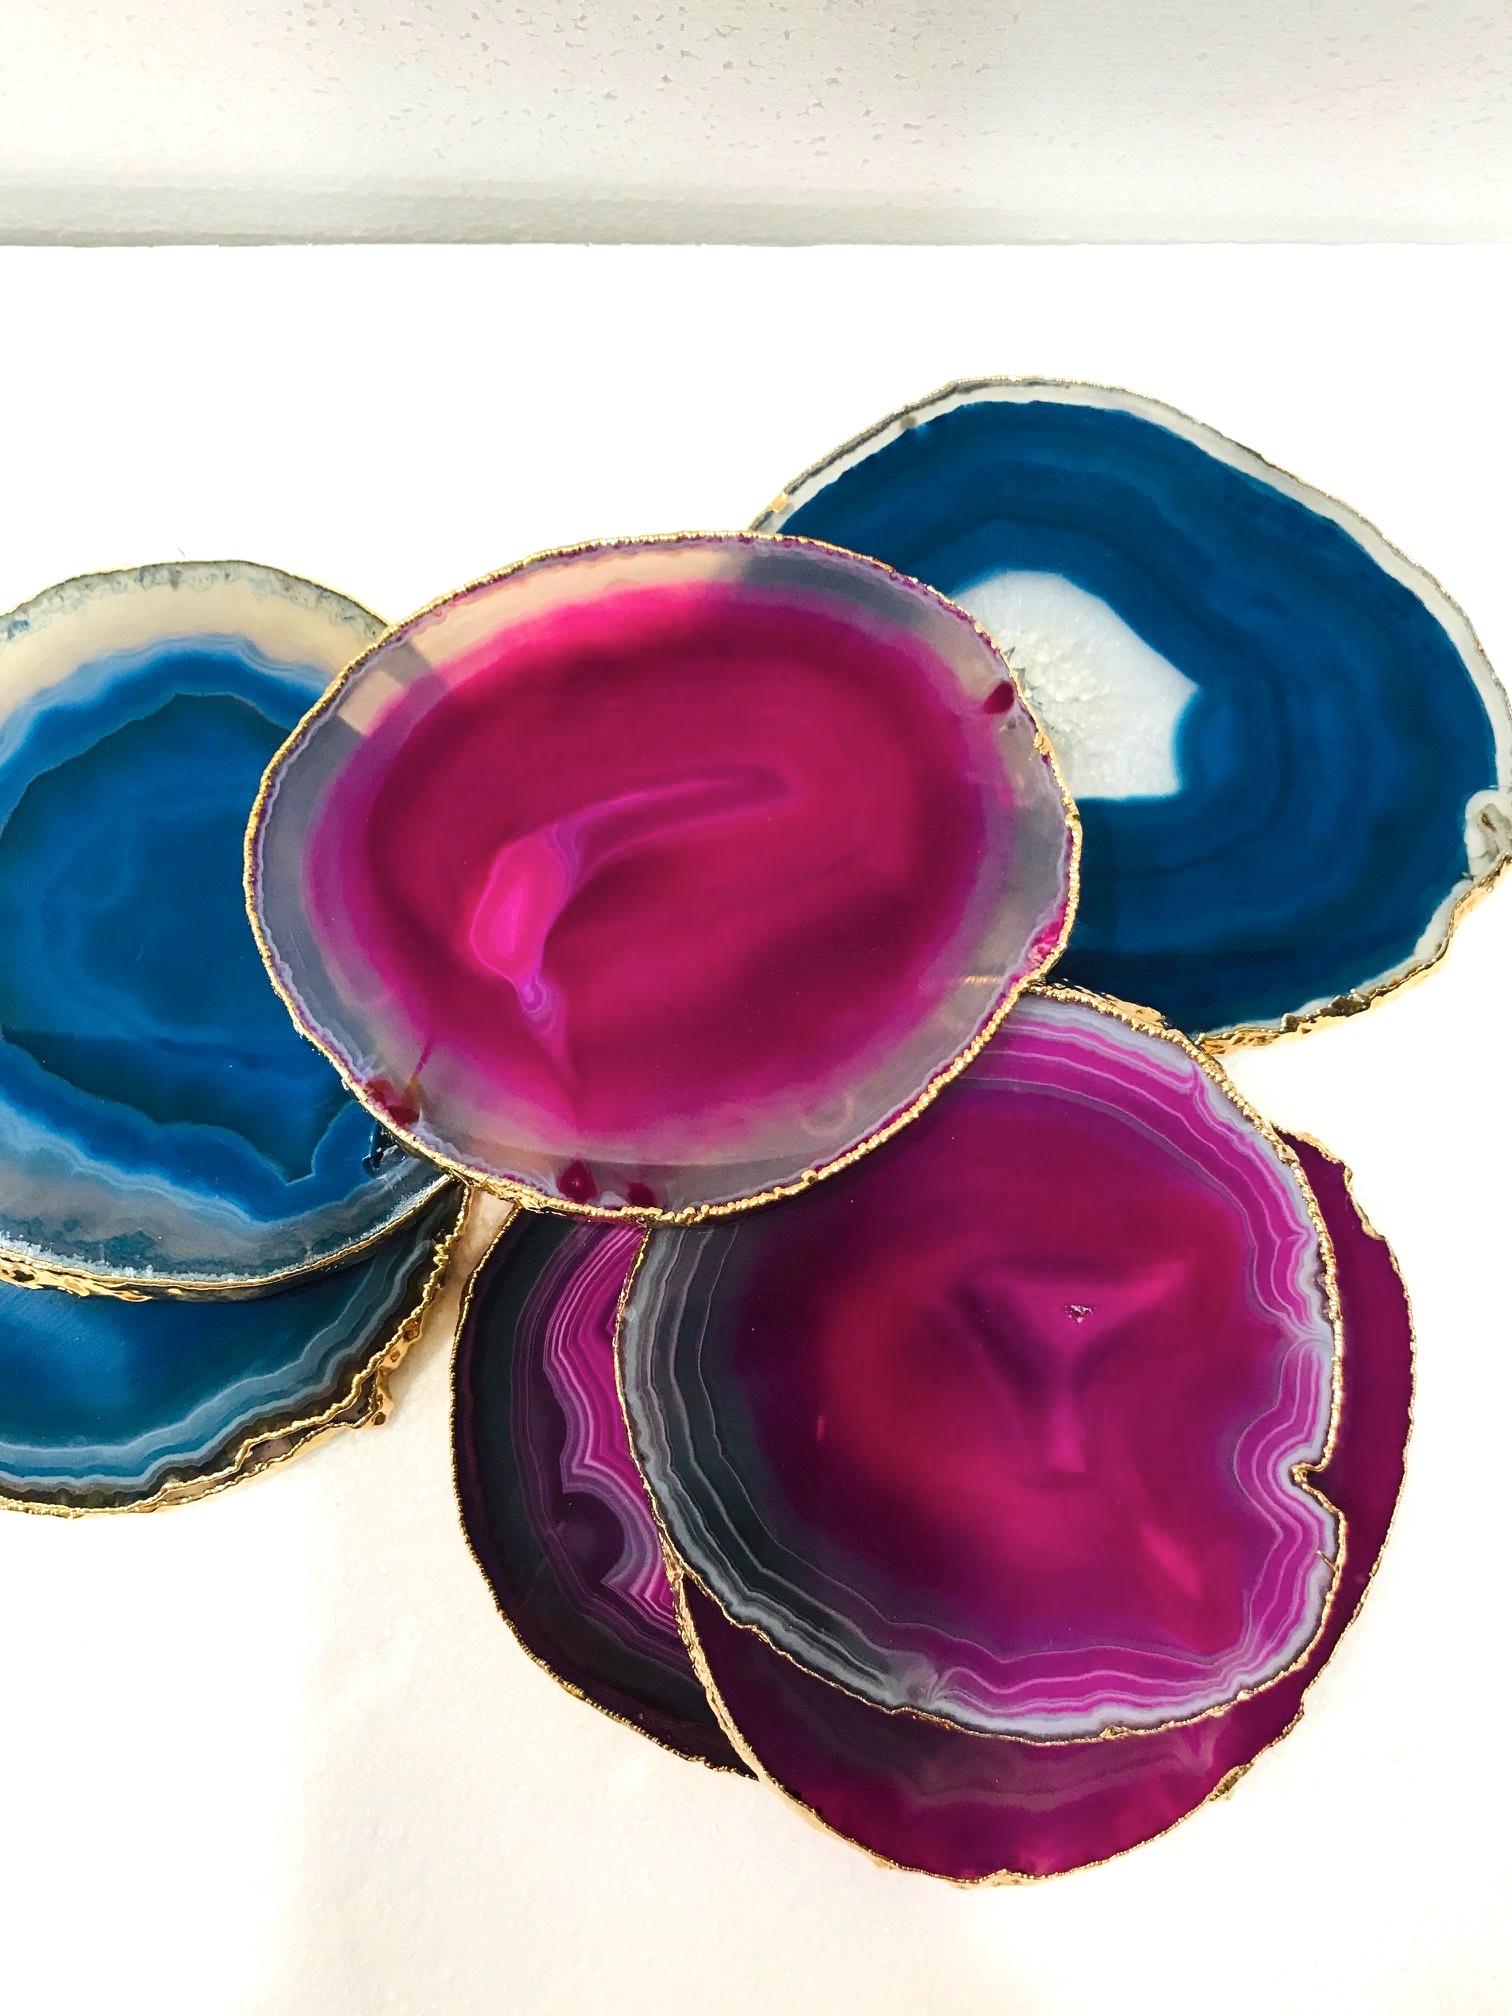 Set of eight organic modern agate and crystal coasters with 24-karat gold-plate finish. Set includes four fuschia and four turquoise coasters with polished fronts and natural edges. Make beautiful and unique accessories to any coffee table or